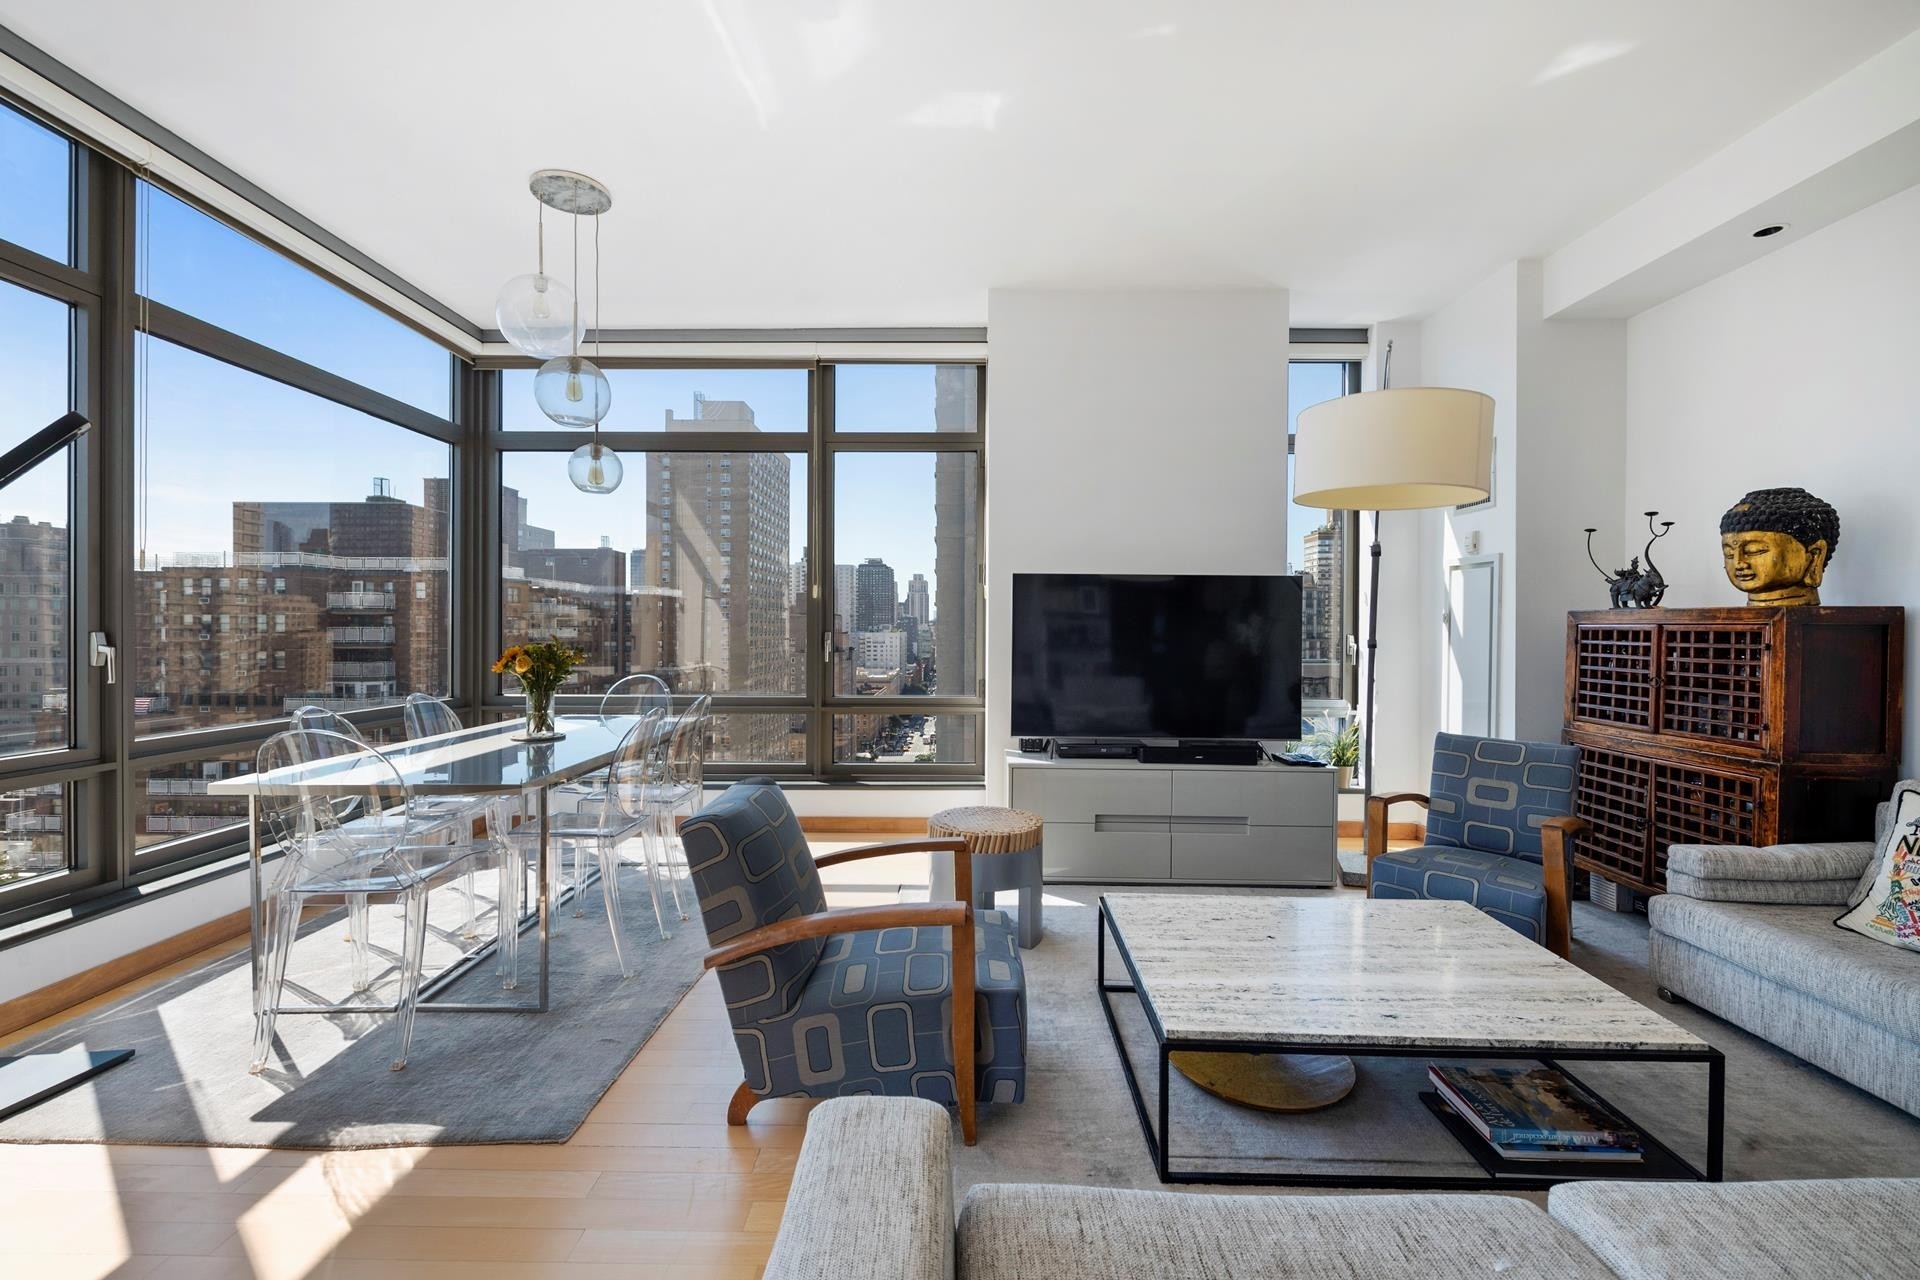 Condominium for Sale at Cielo, The, 450 E 83RD ST, 14CE Yorkville, New York, New York 10028